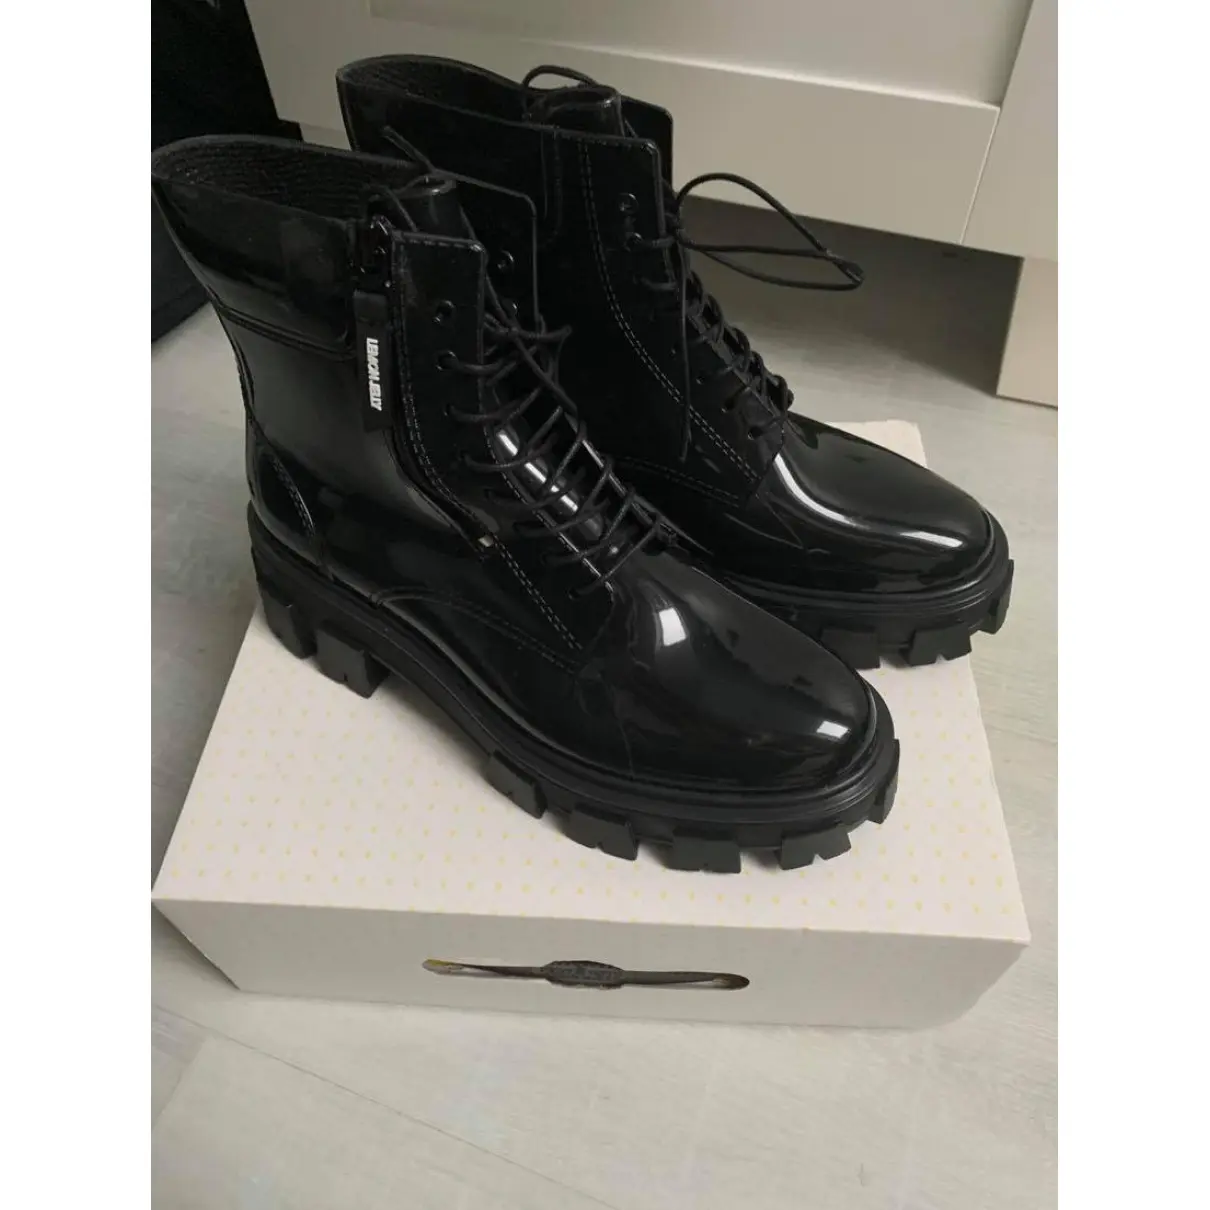 Buy Lemon Jelly Ankle boots online